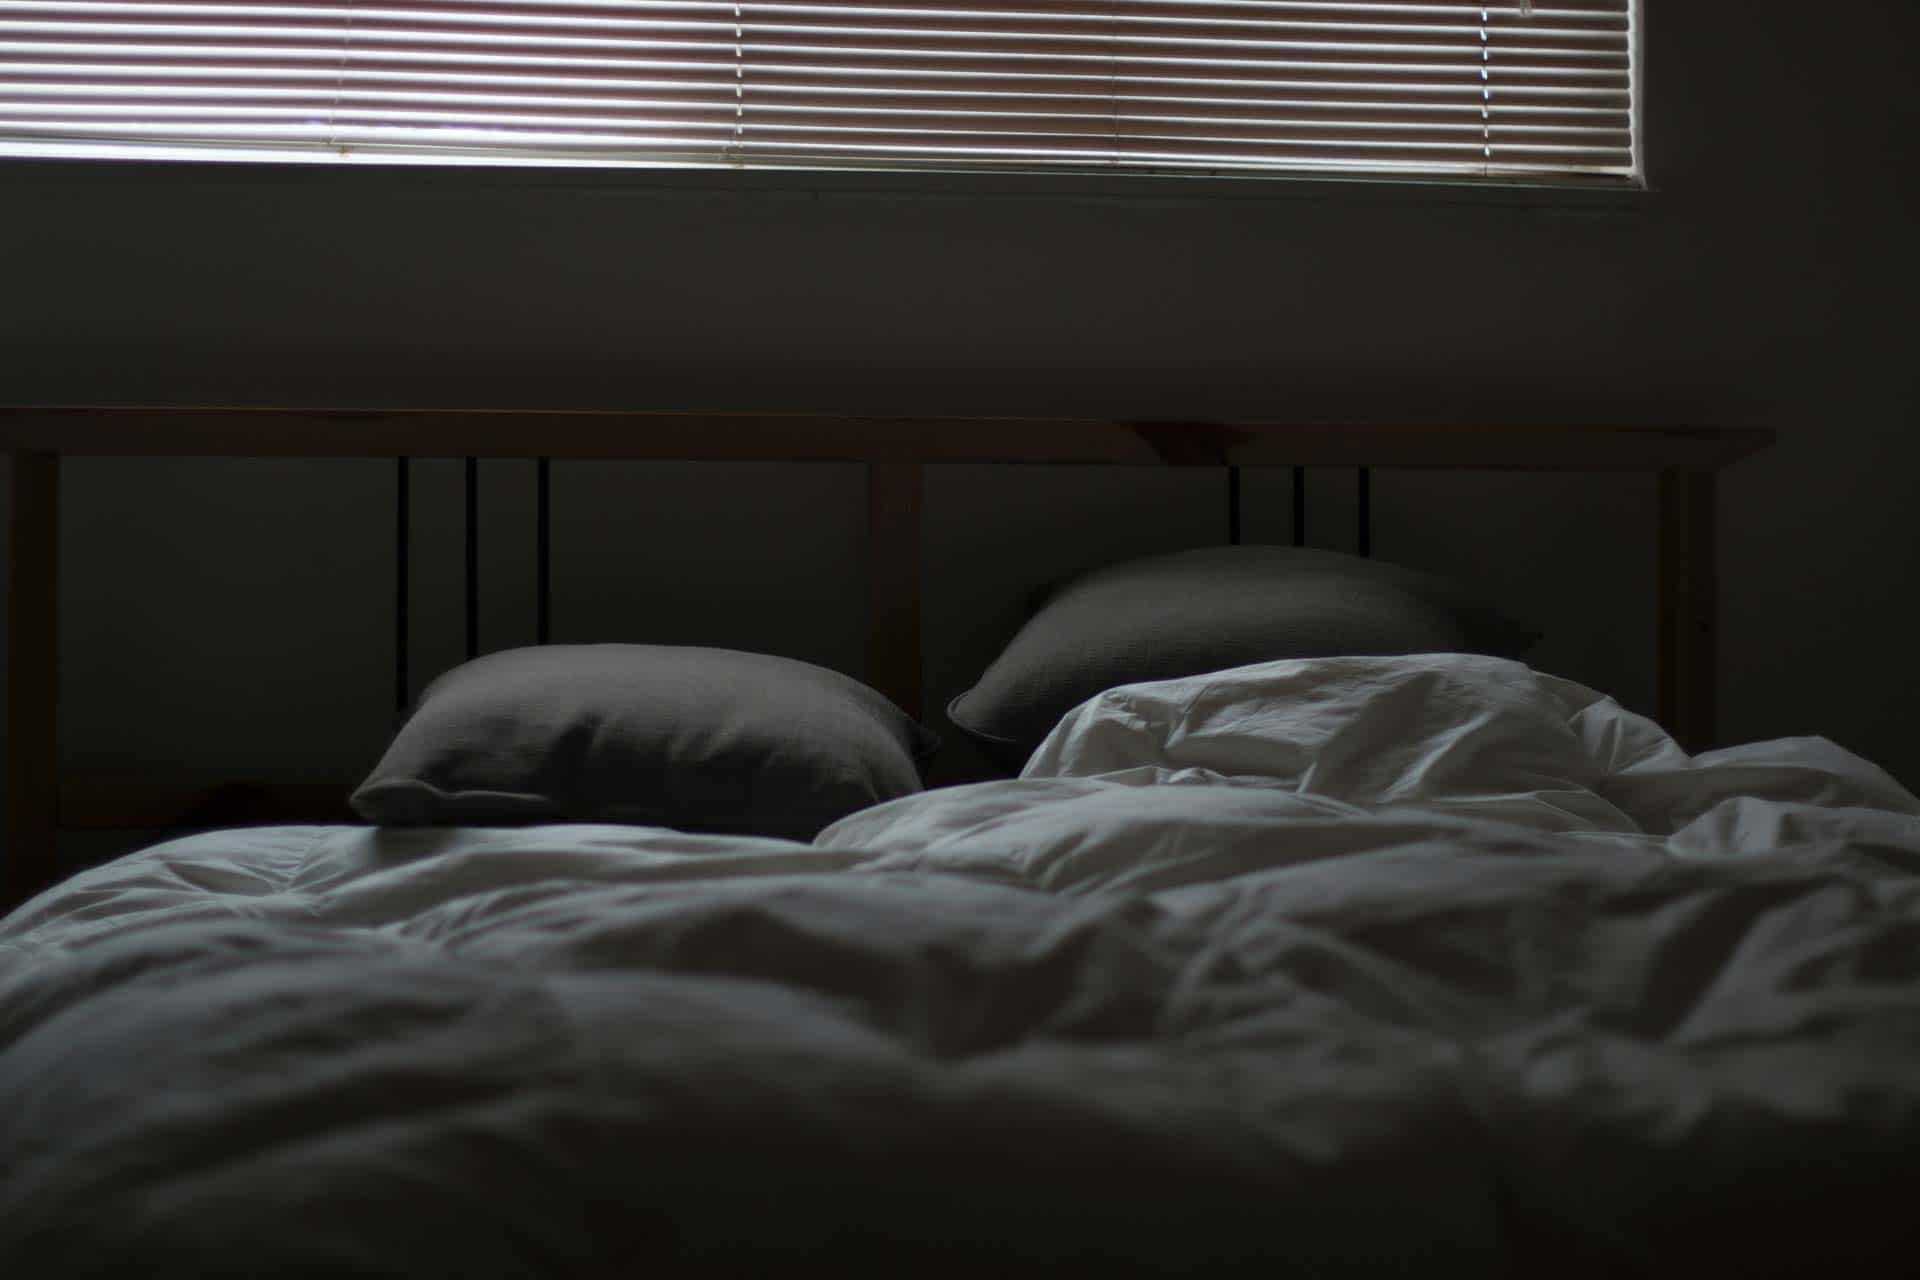 3 Ways to Get Better Sleep & Why it’s Important for People in Recovery, According to Science